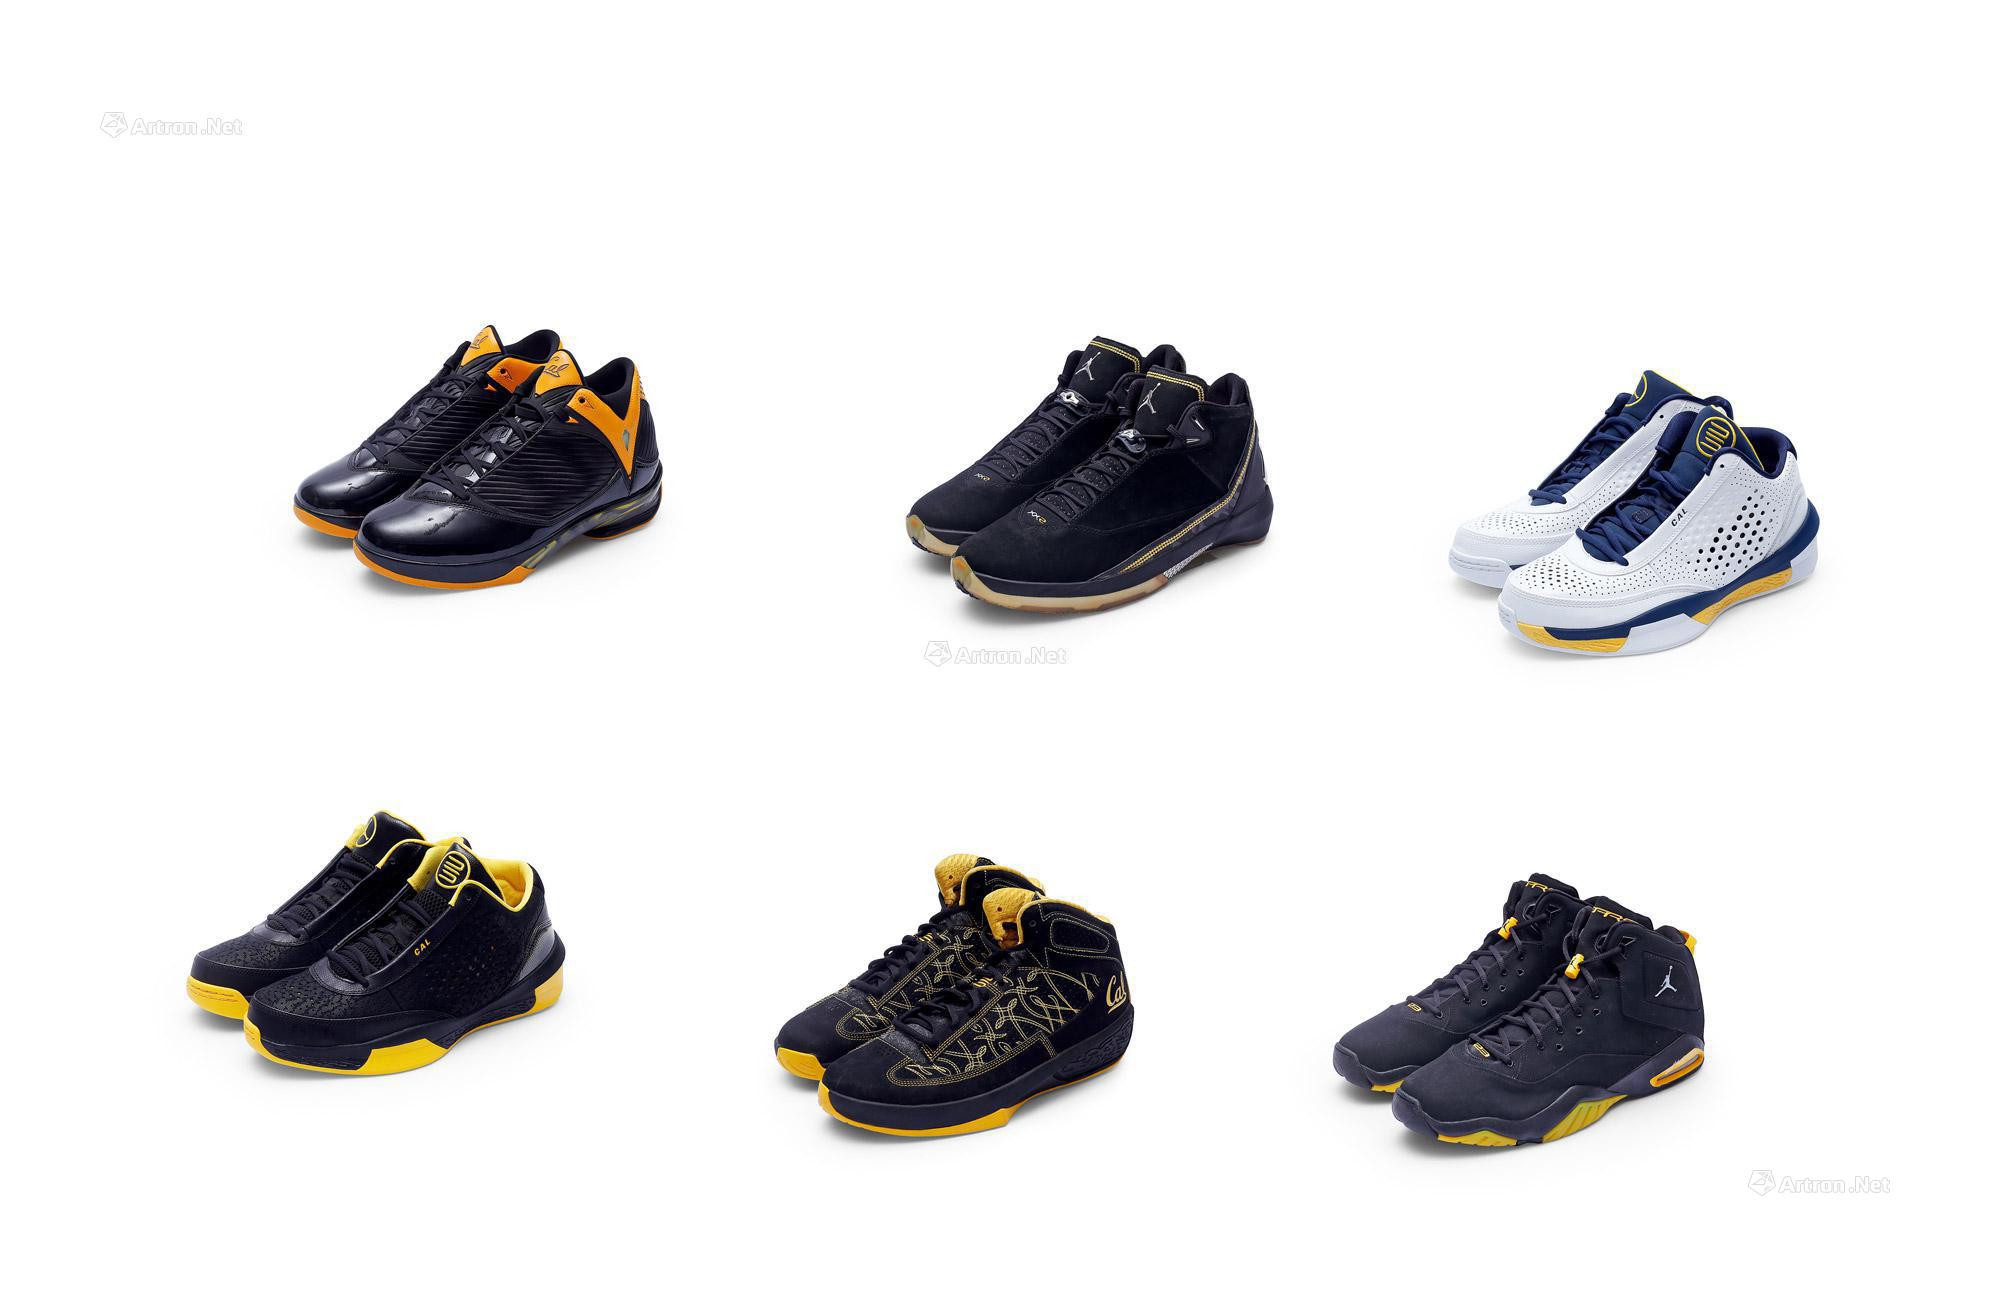 California University， Berkeley Exclusive Sneaker Collection  6 Pairs of Player Exclusive Sneakers